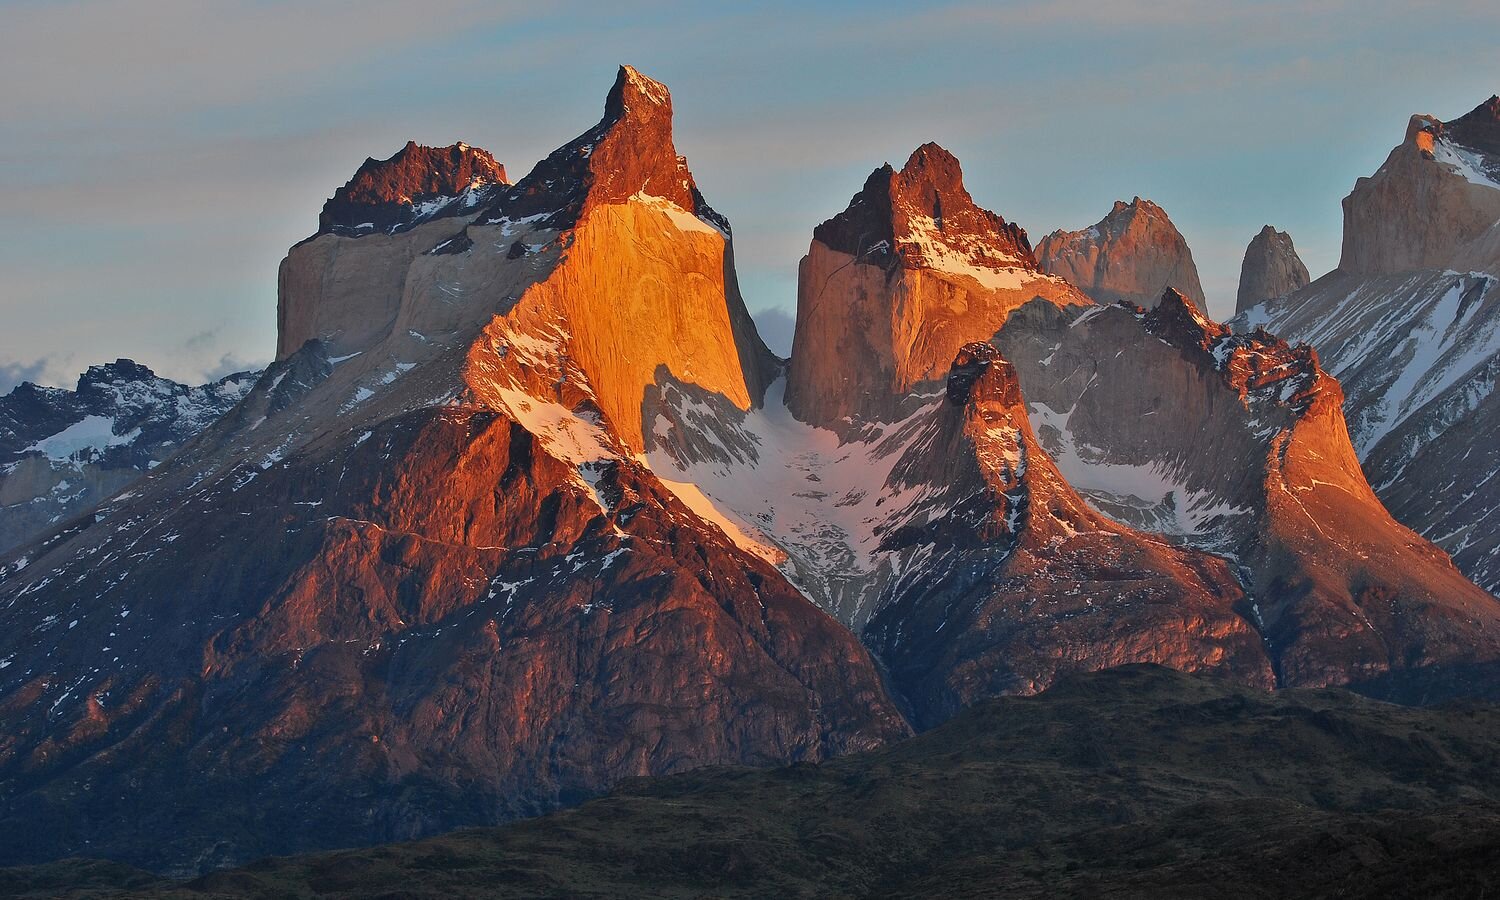 Patagonia Adventure across Chile and Argentina Trekking Tour with Chile Montaña_05.jpg